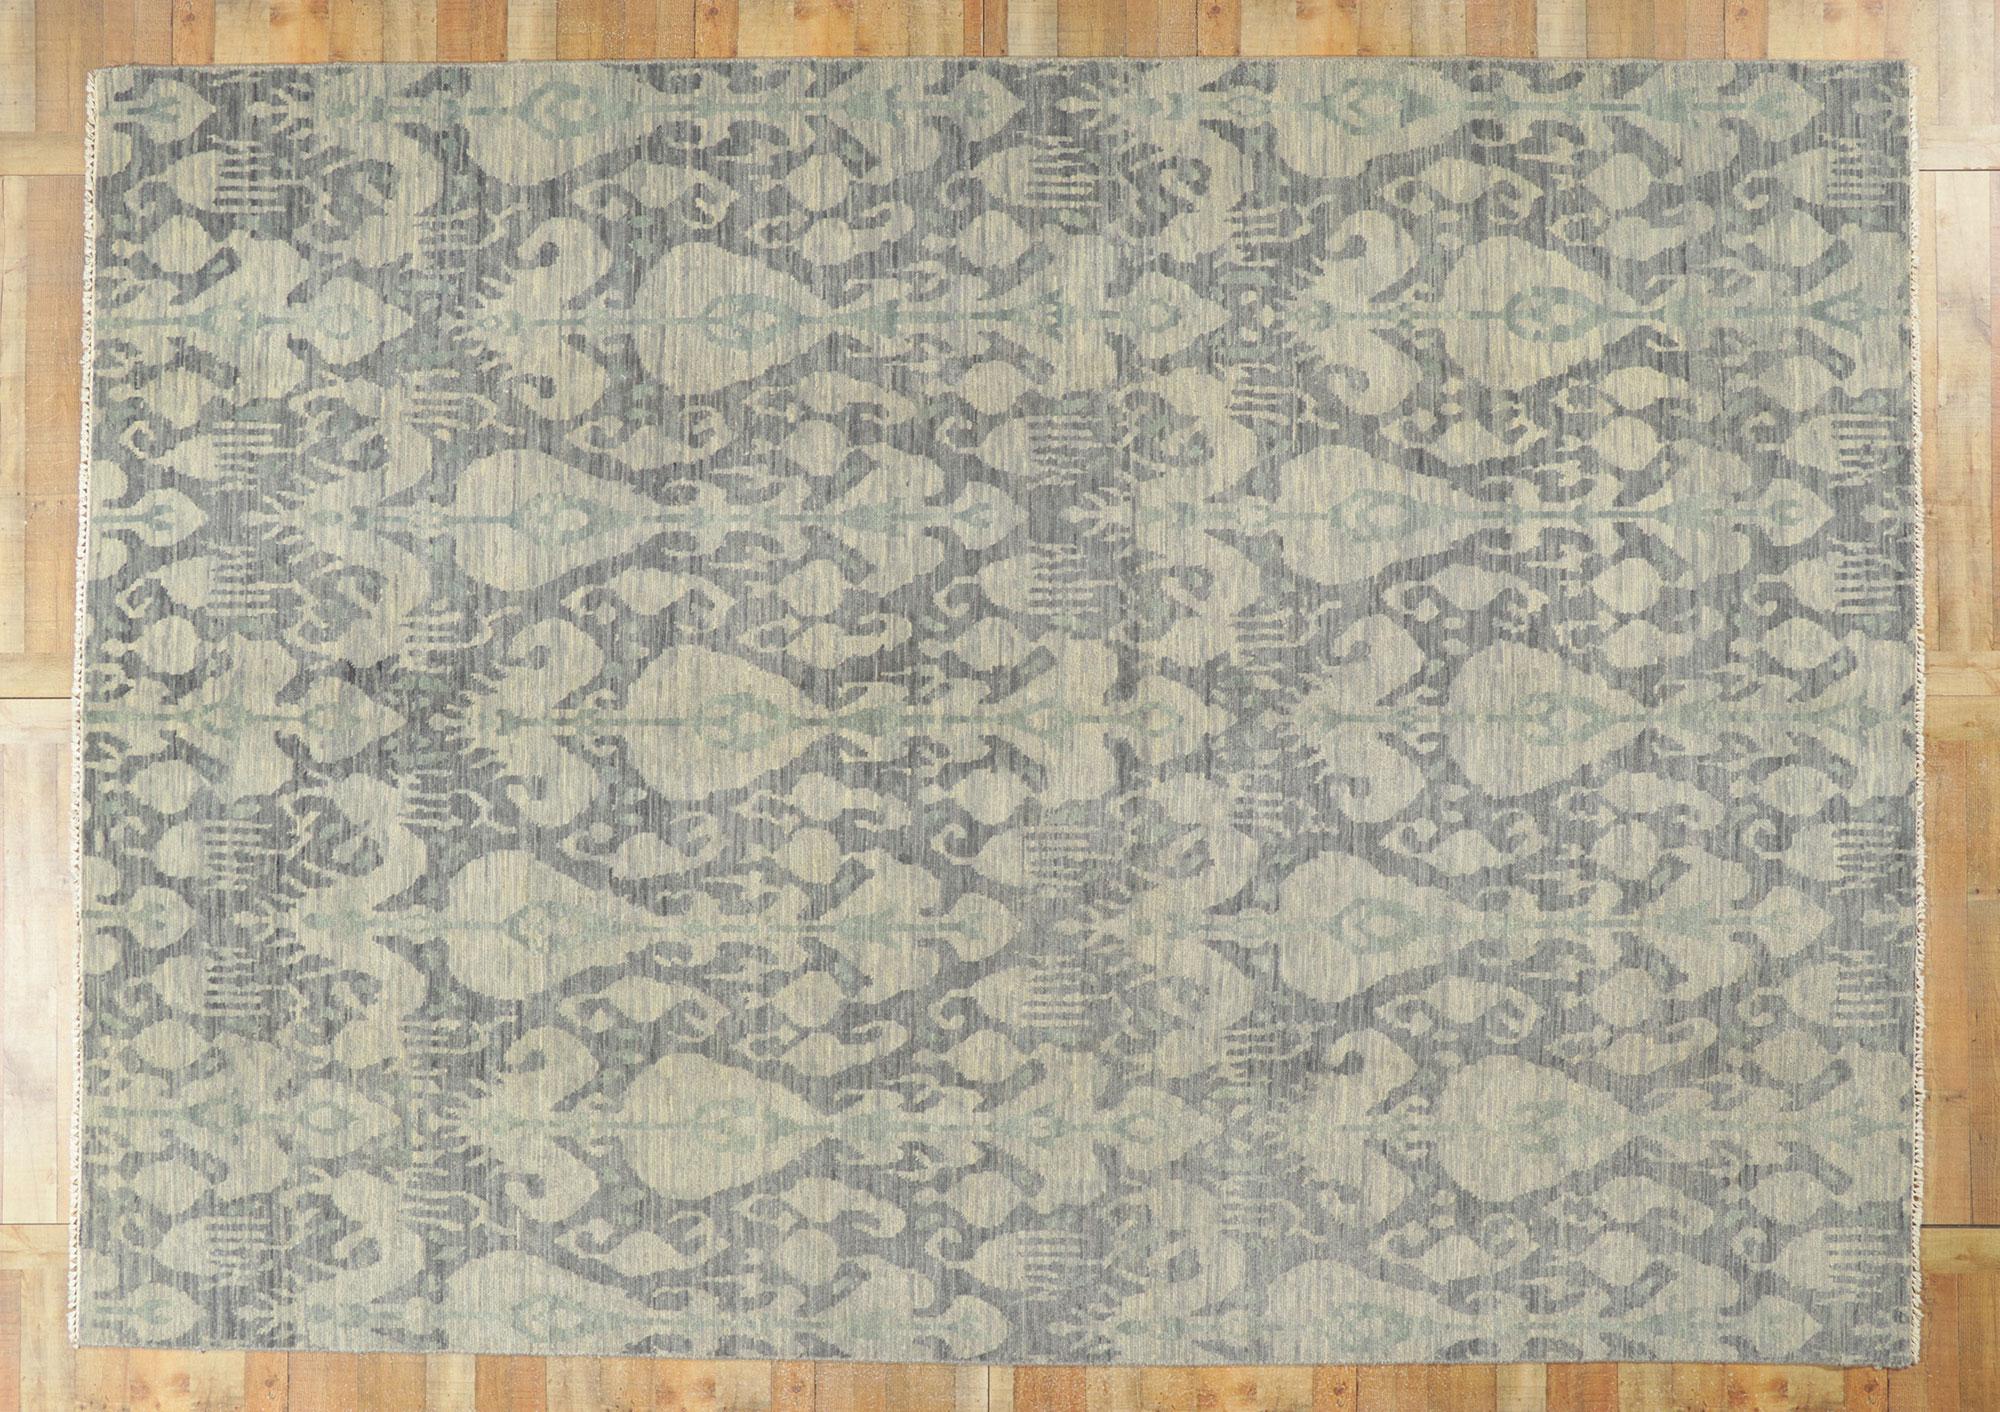 New Transitional Ikat Rug with Gray and Blue Earth-Tone Colors For Sale 1